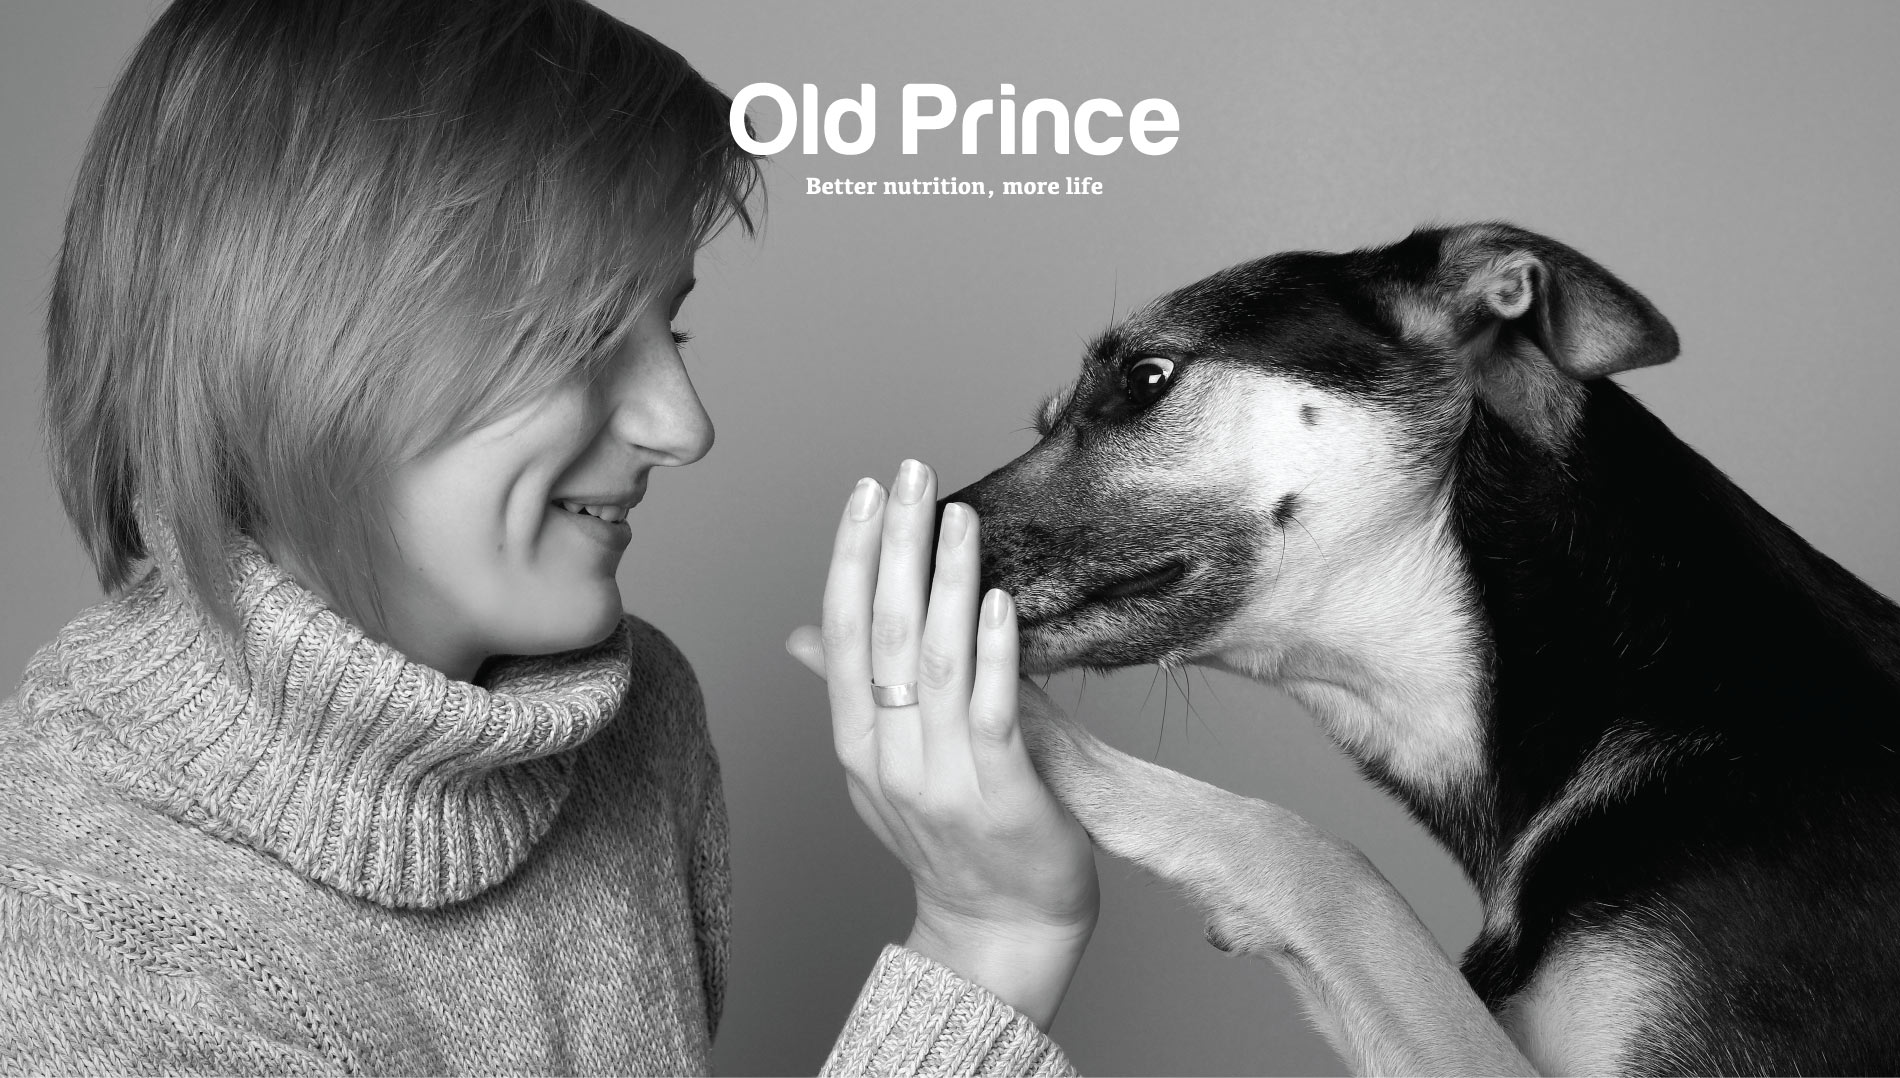 Old Prince